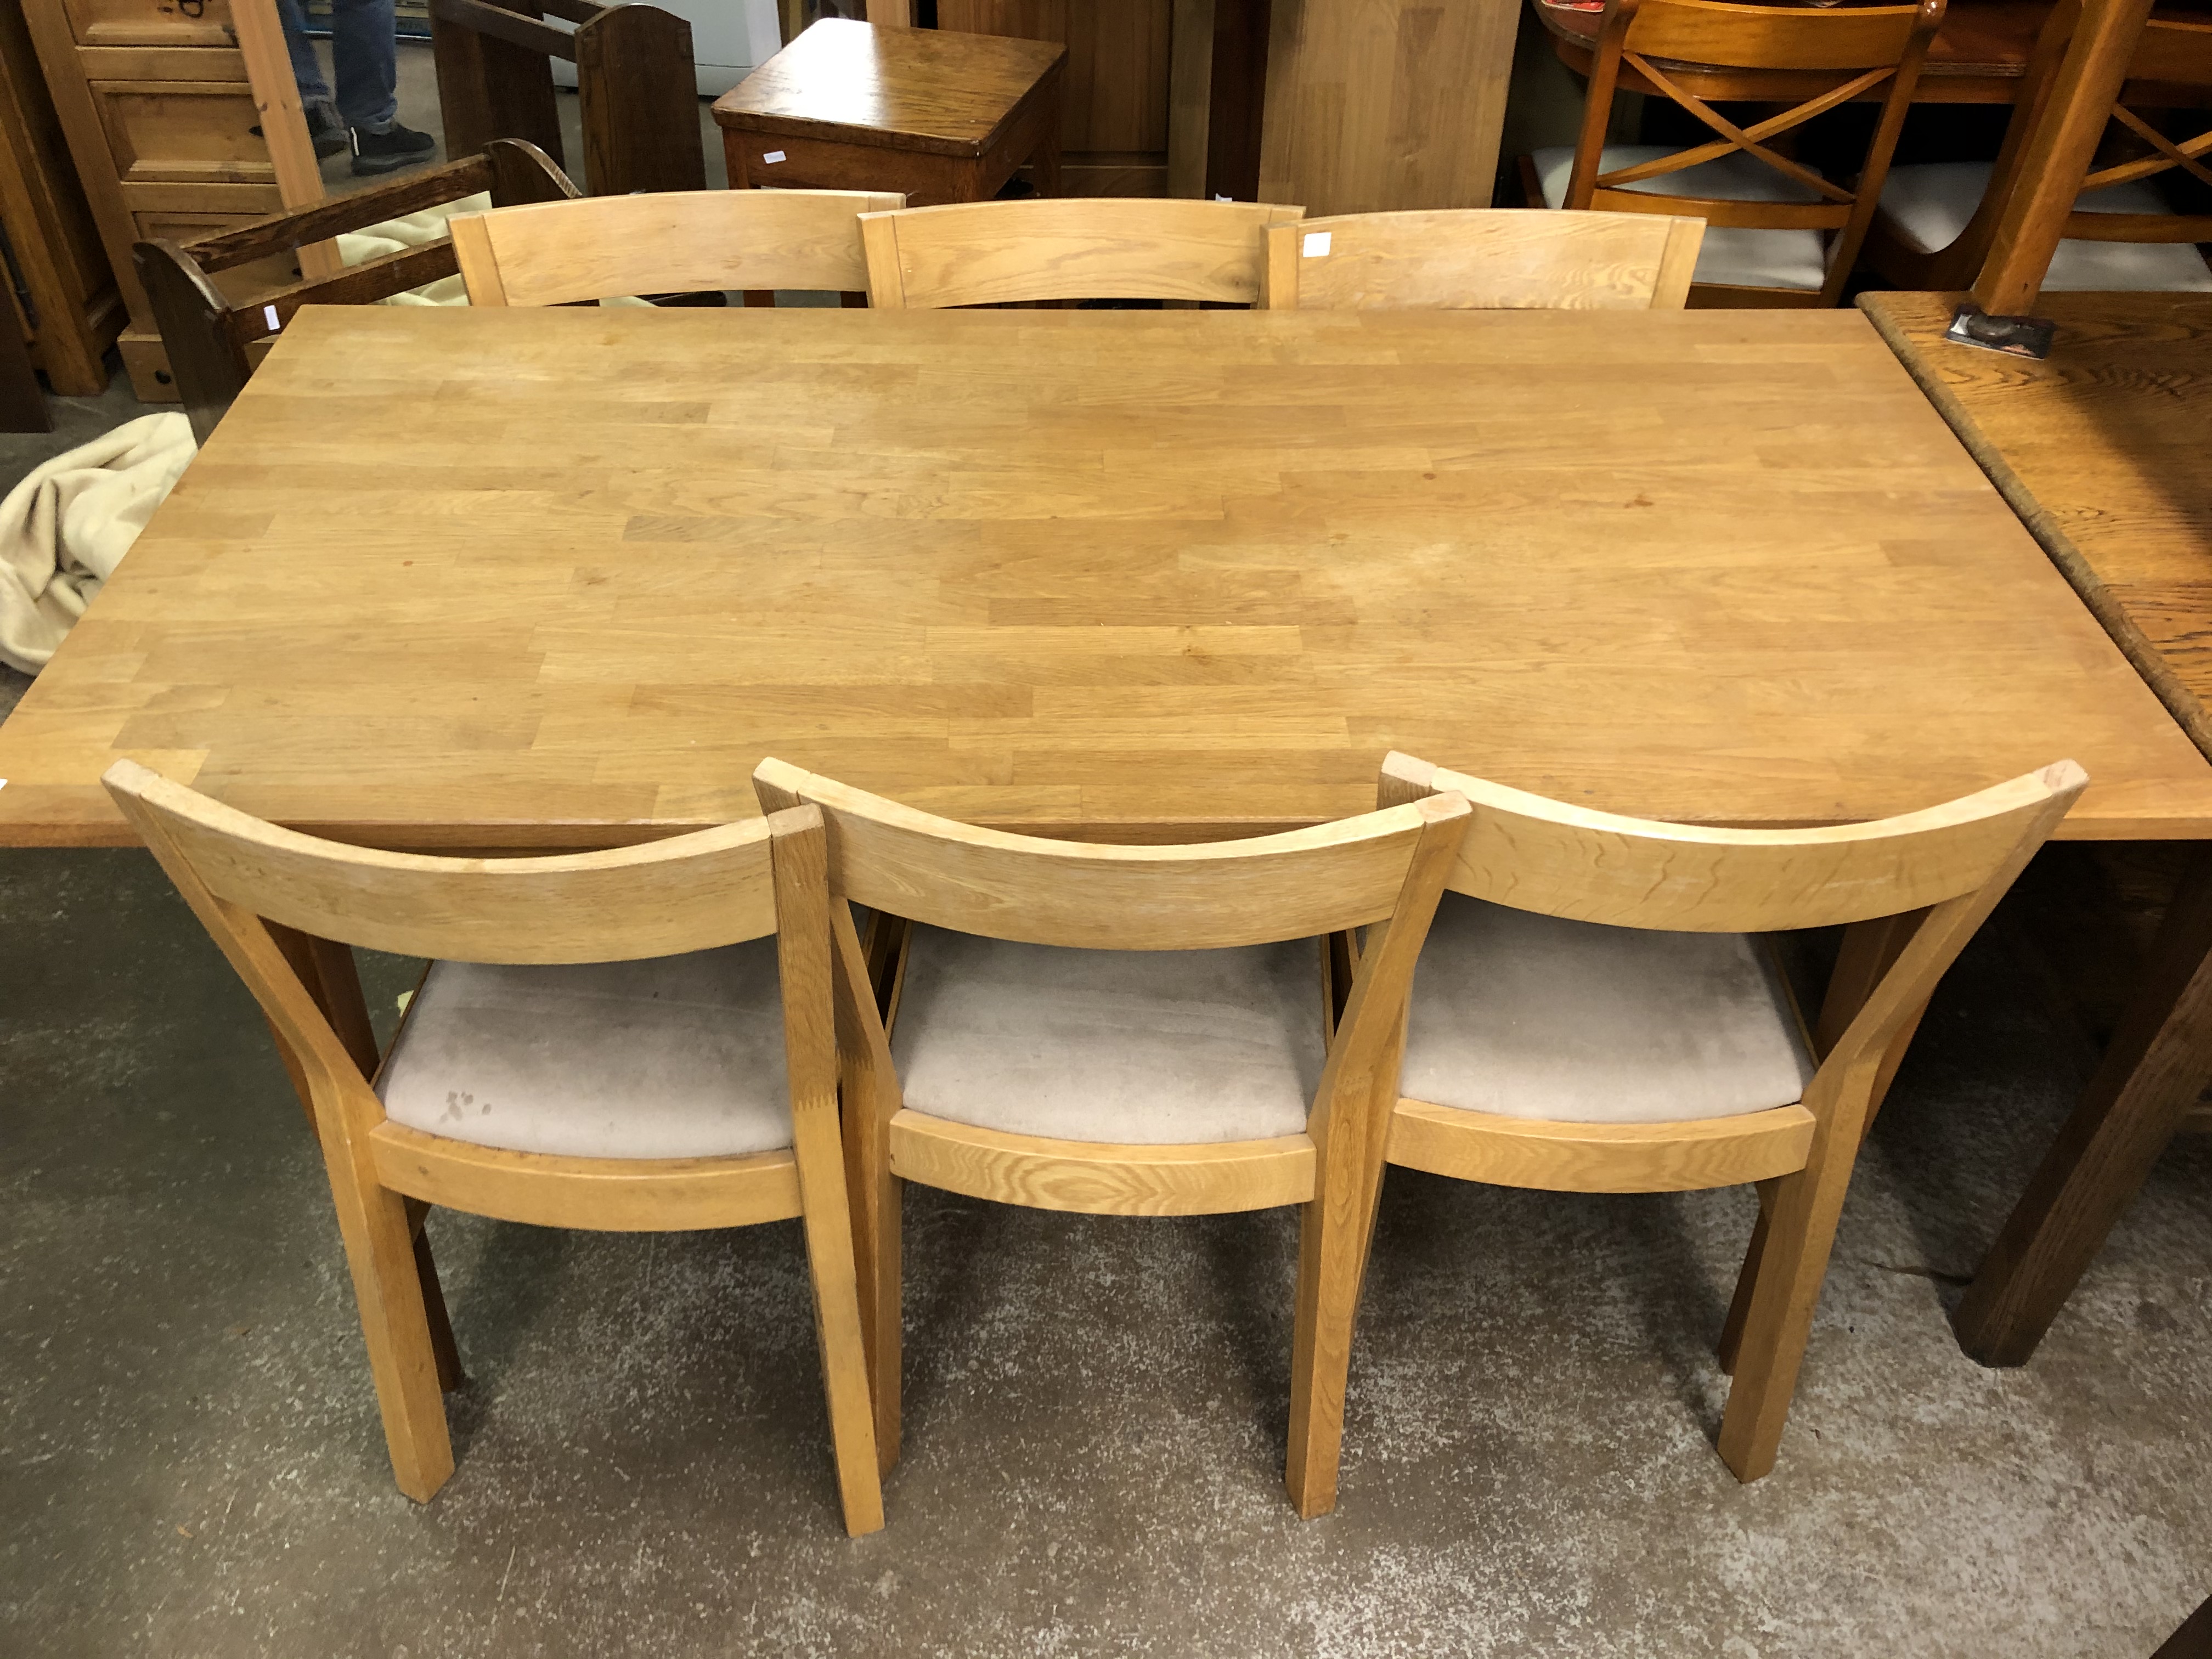 OAK DINING TABLE AND SIX CHAIRS 160CM W X 75CM H X 80CM D APPROX